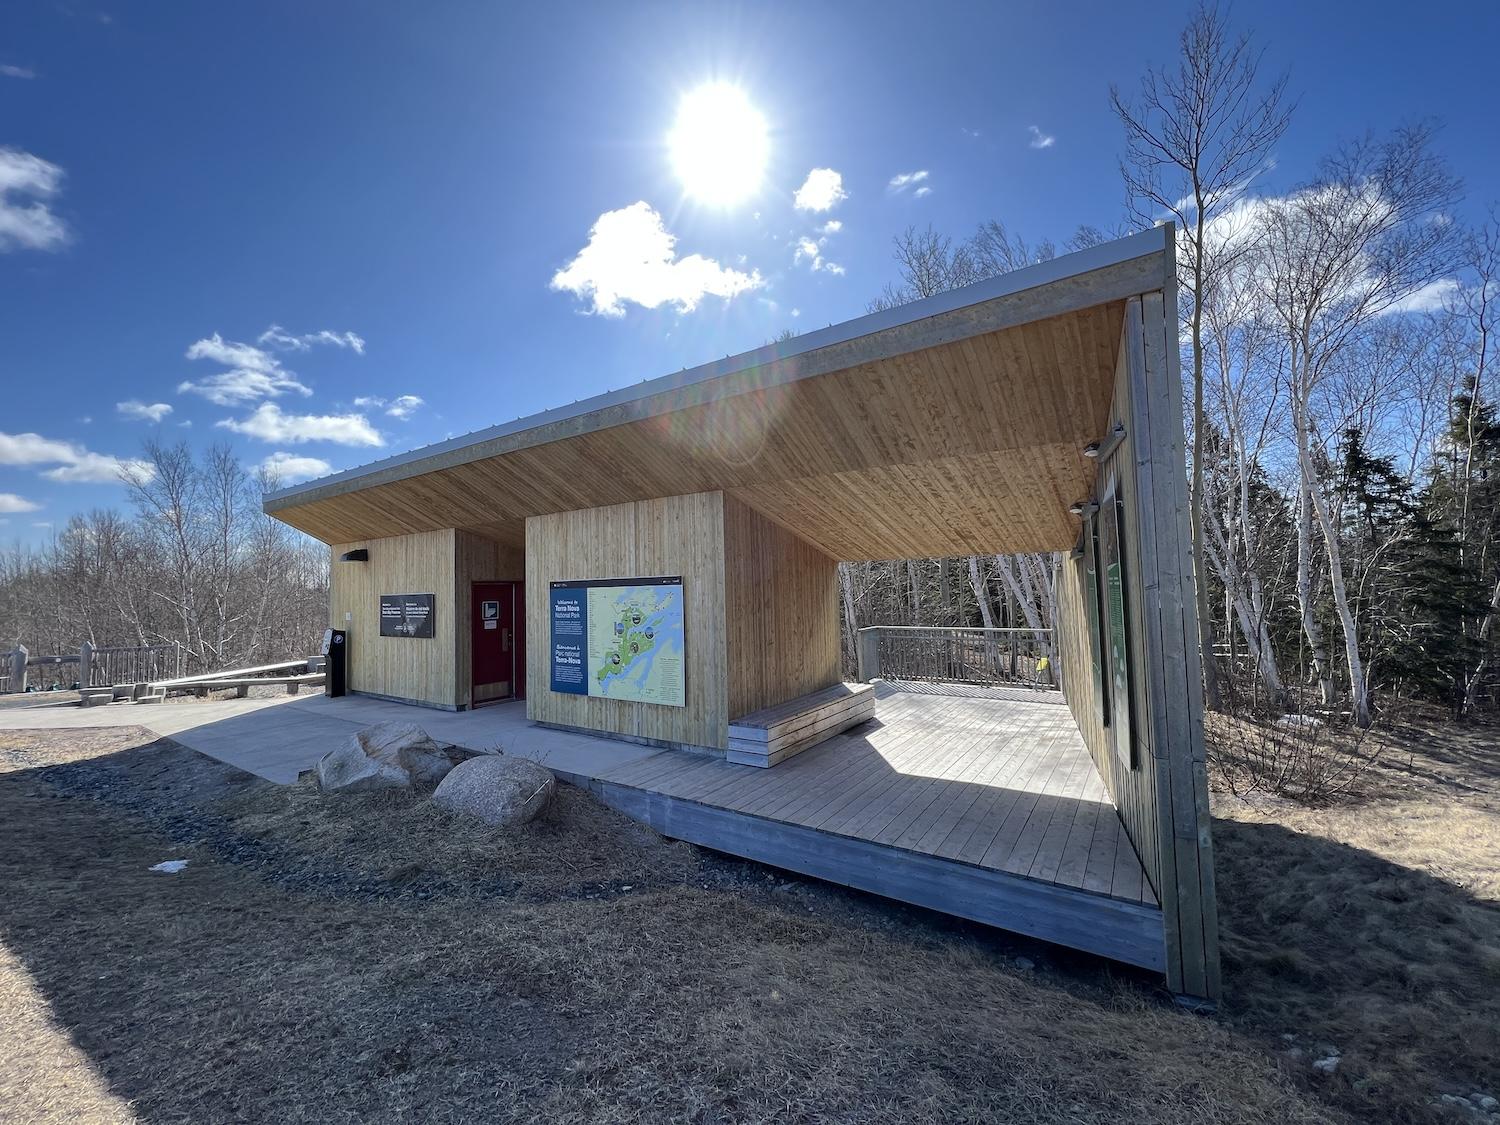 This roadside washroom in Terra Nova National Park is a thing of beauty.